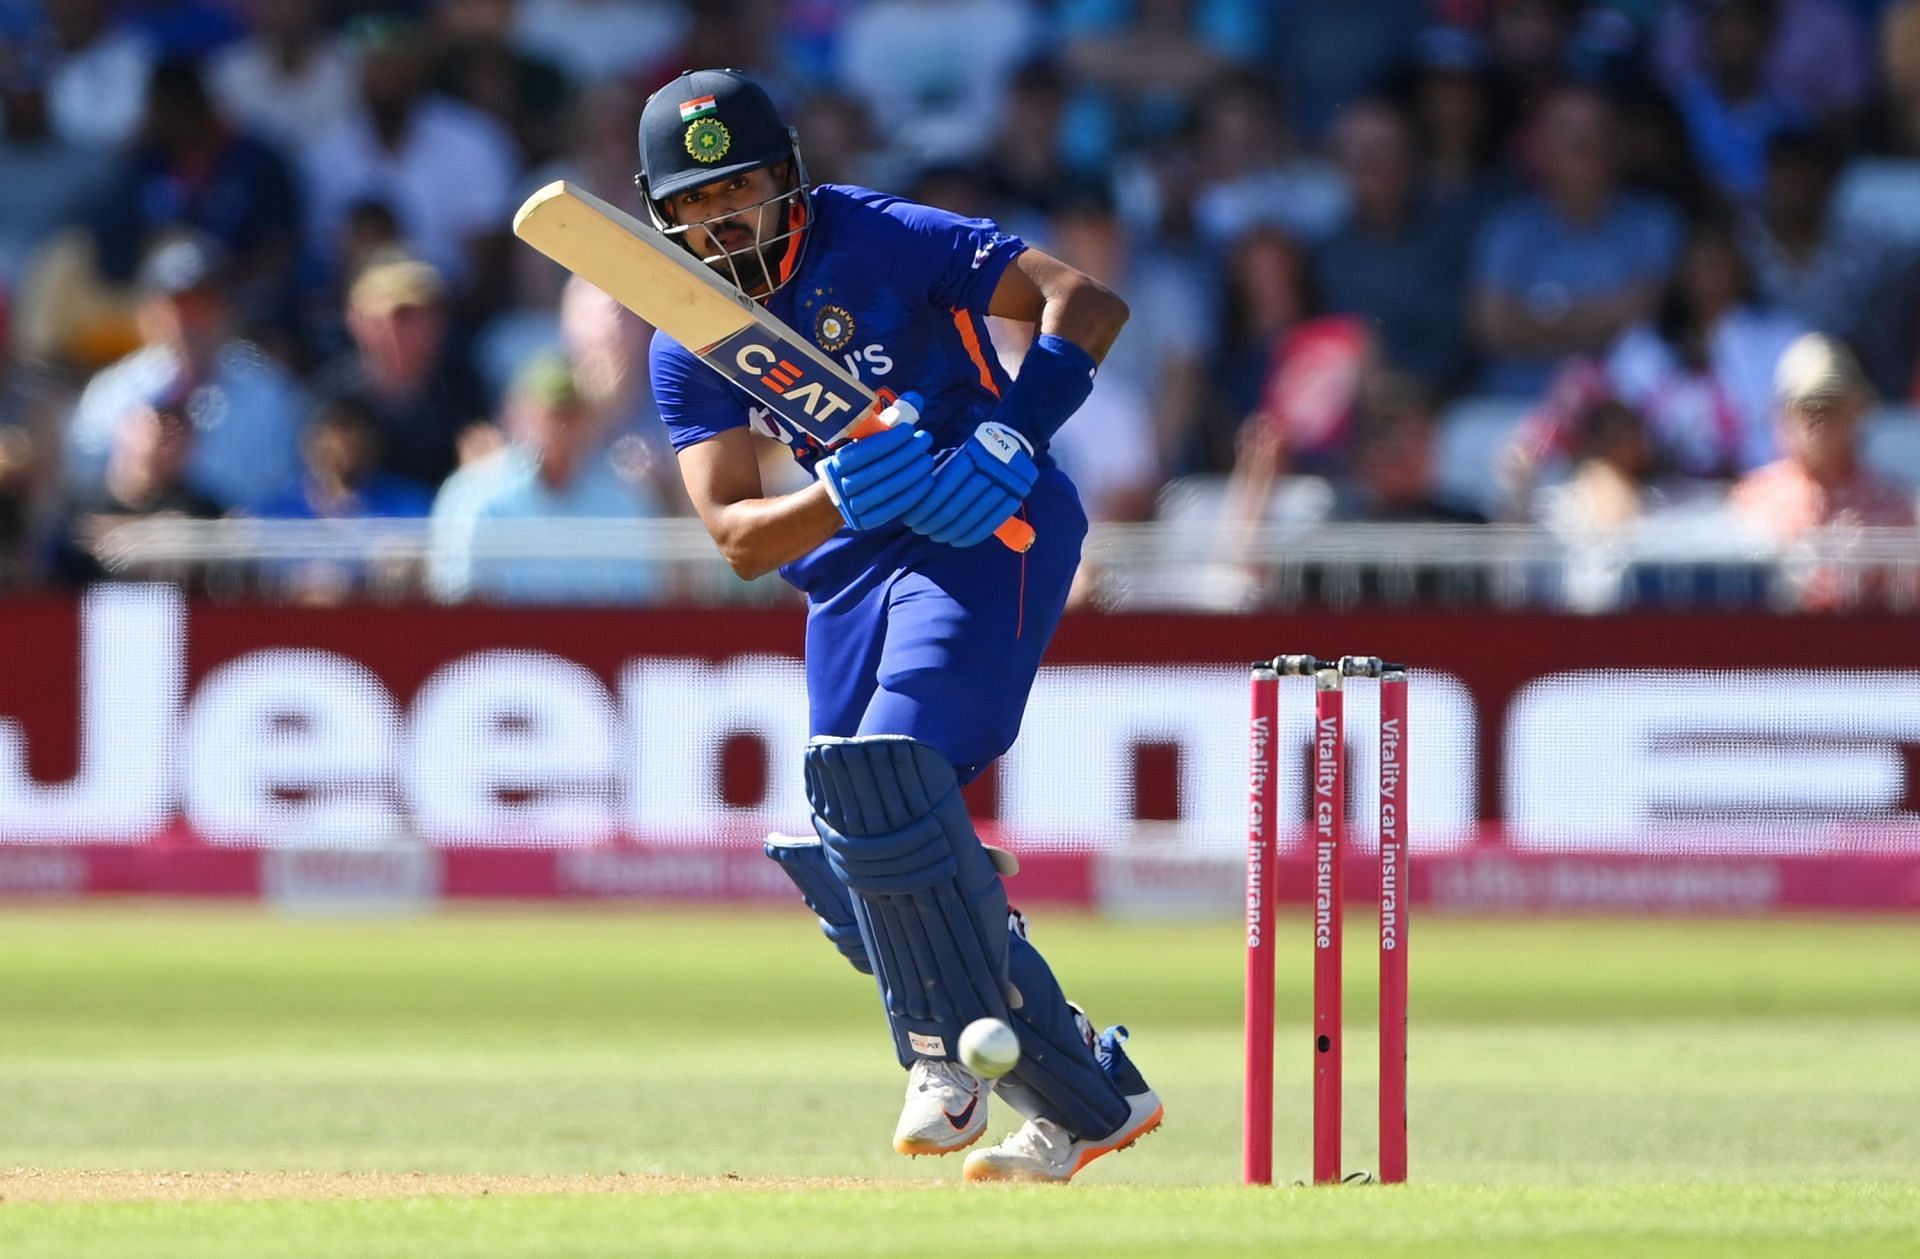 Shreyas Iyer scored 63 runs off 71 deliveries in the second ODI against West Indies